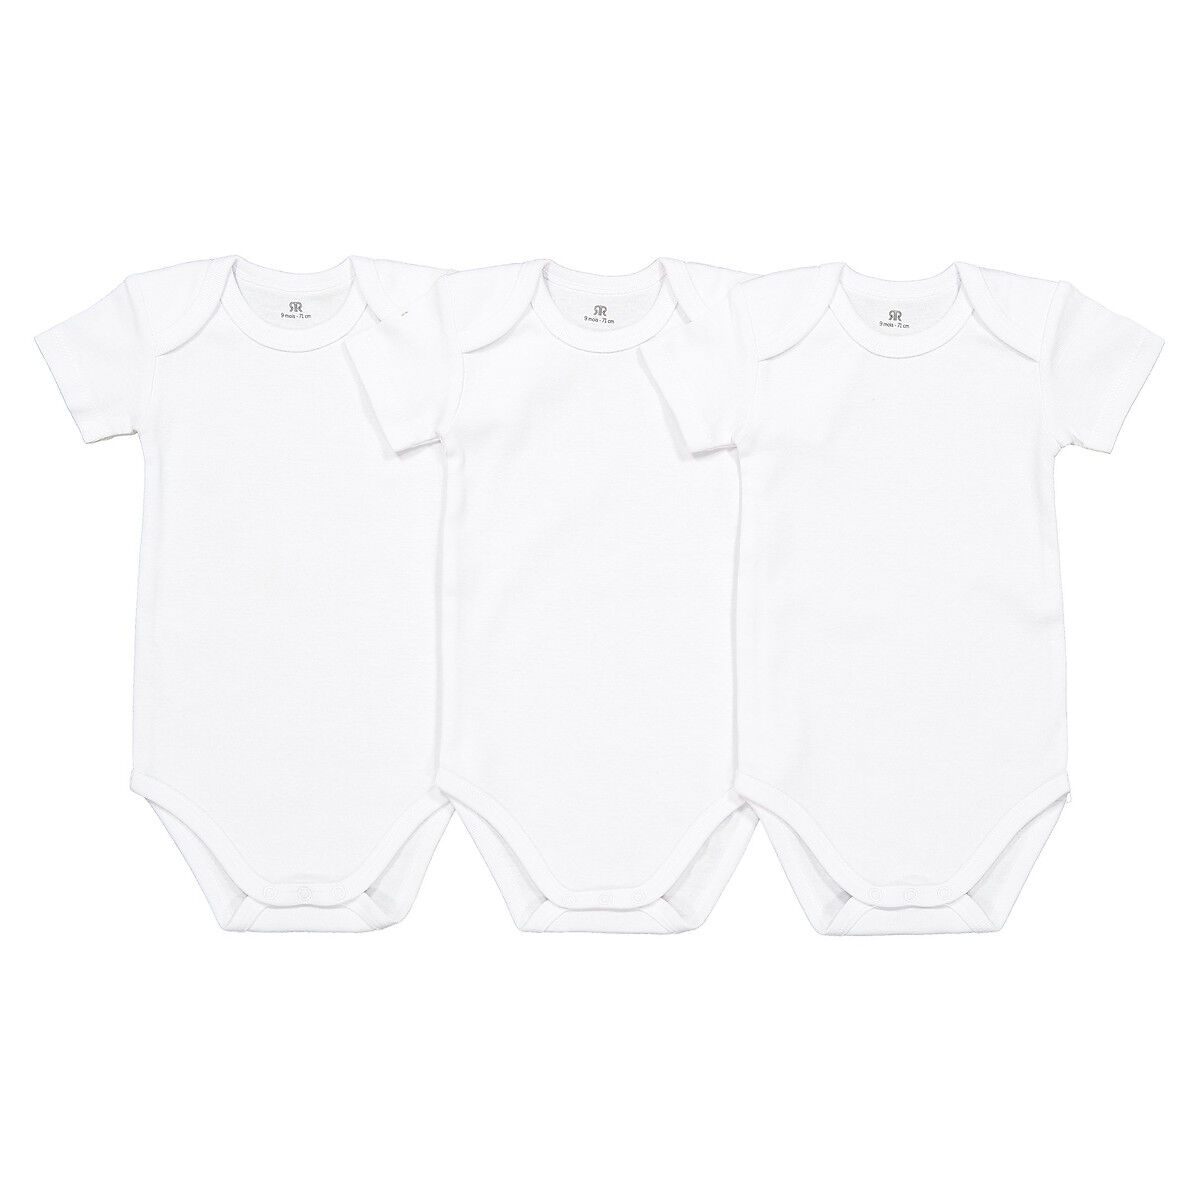 LA REDOUTE COLLECTIONS 3er-Pack Bodys aus Bio-Baumwolle WEISS